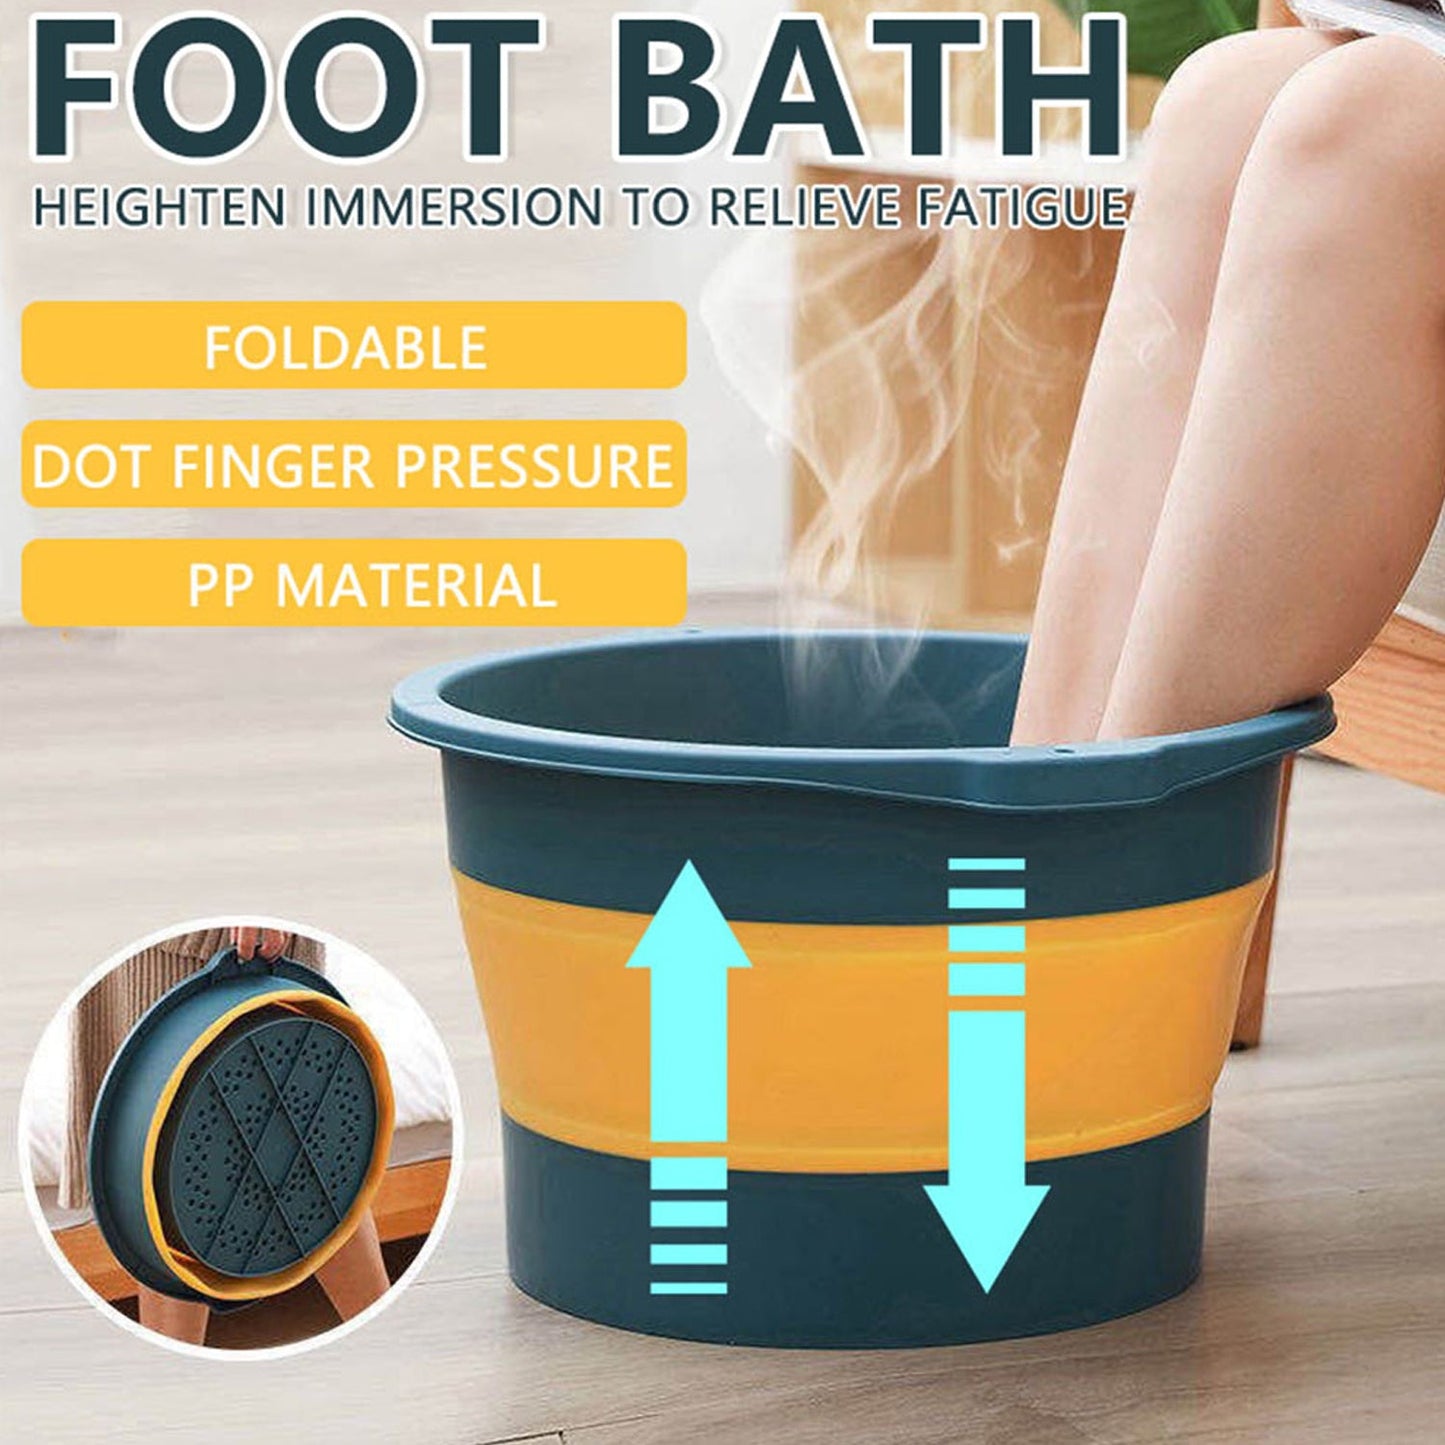 2786 Multi-Purpose Portable Collapsible Folding Tub, with Hanging Hole & Save Storage Space, Also use for Foot Spa. DeoDap